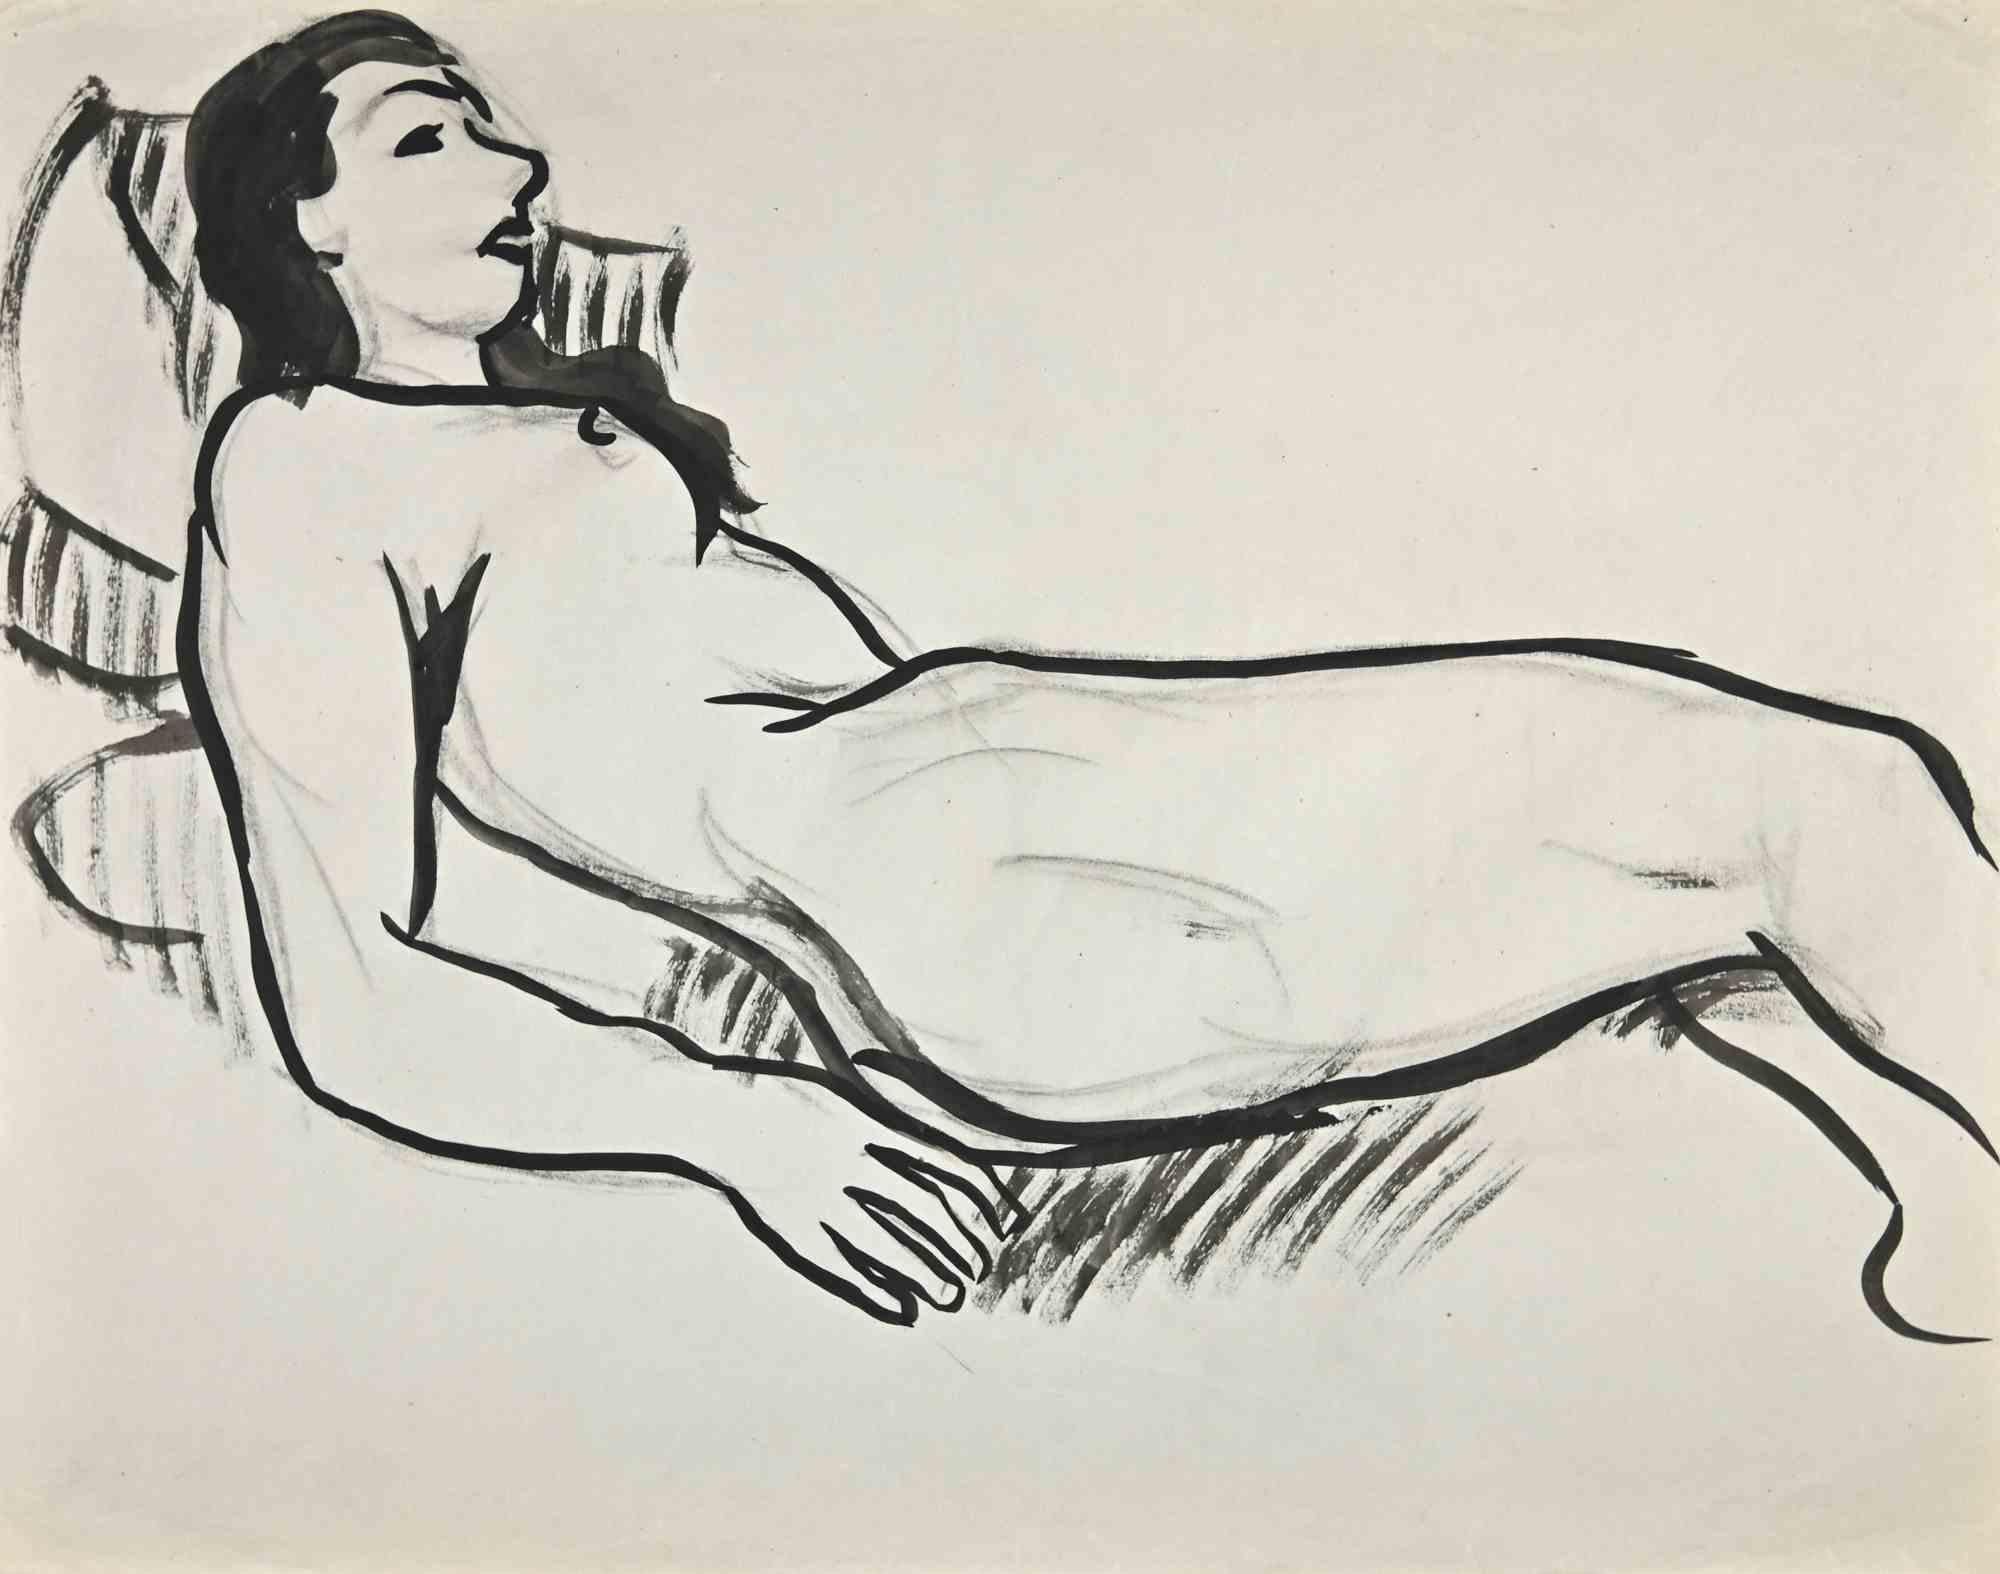 Reclined Nude is a drawing in watercolor, realized in the Mid-20th Century by Jean Delpech (1916-1988). 

Good conditions with minor folding and cuts.

Jean-Raymond Delpech (1988-1916) is a French painter, engraver and illustrator, who is most